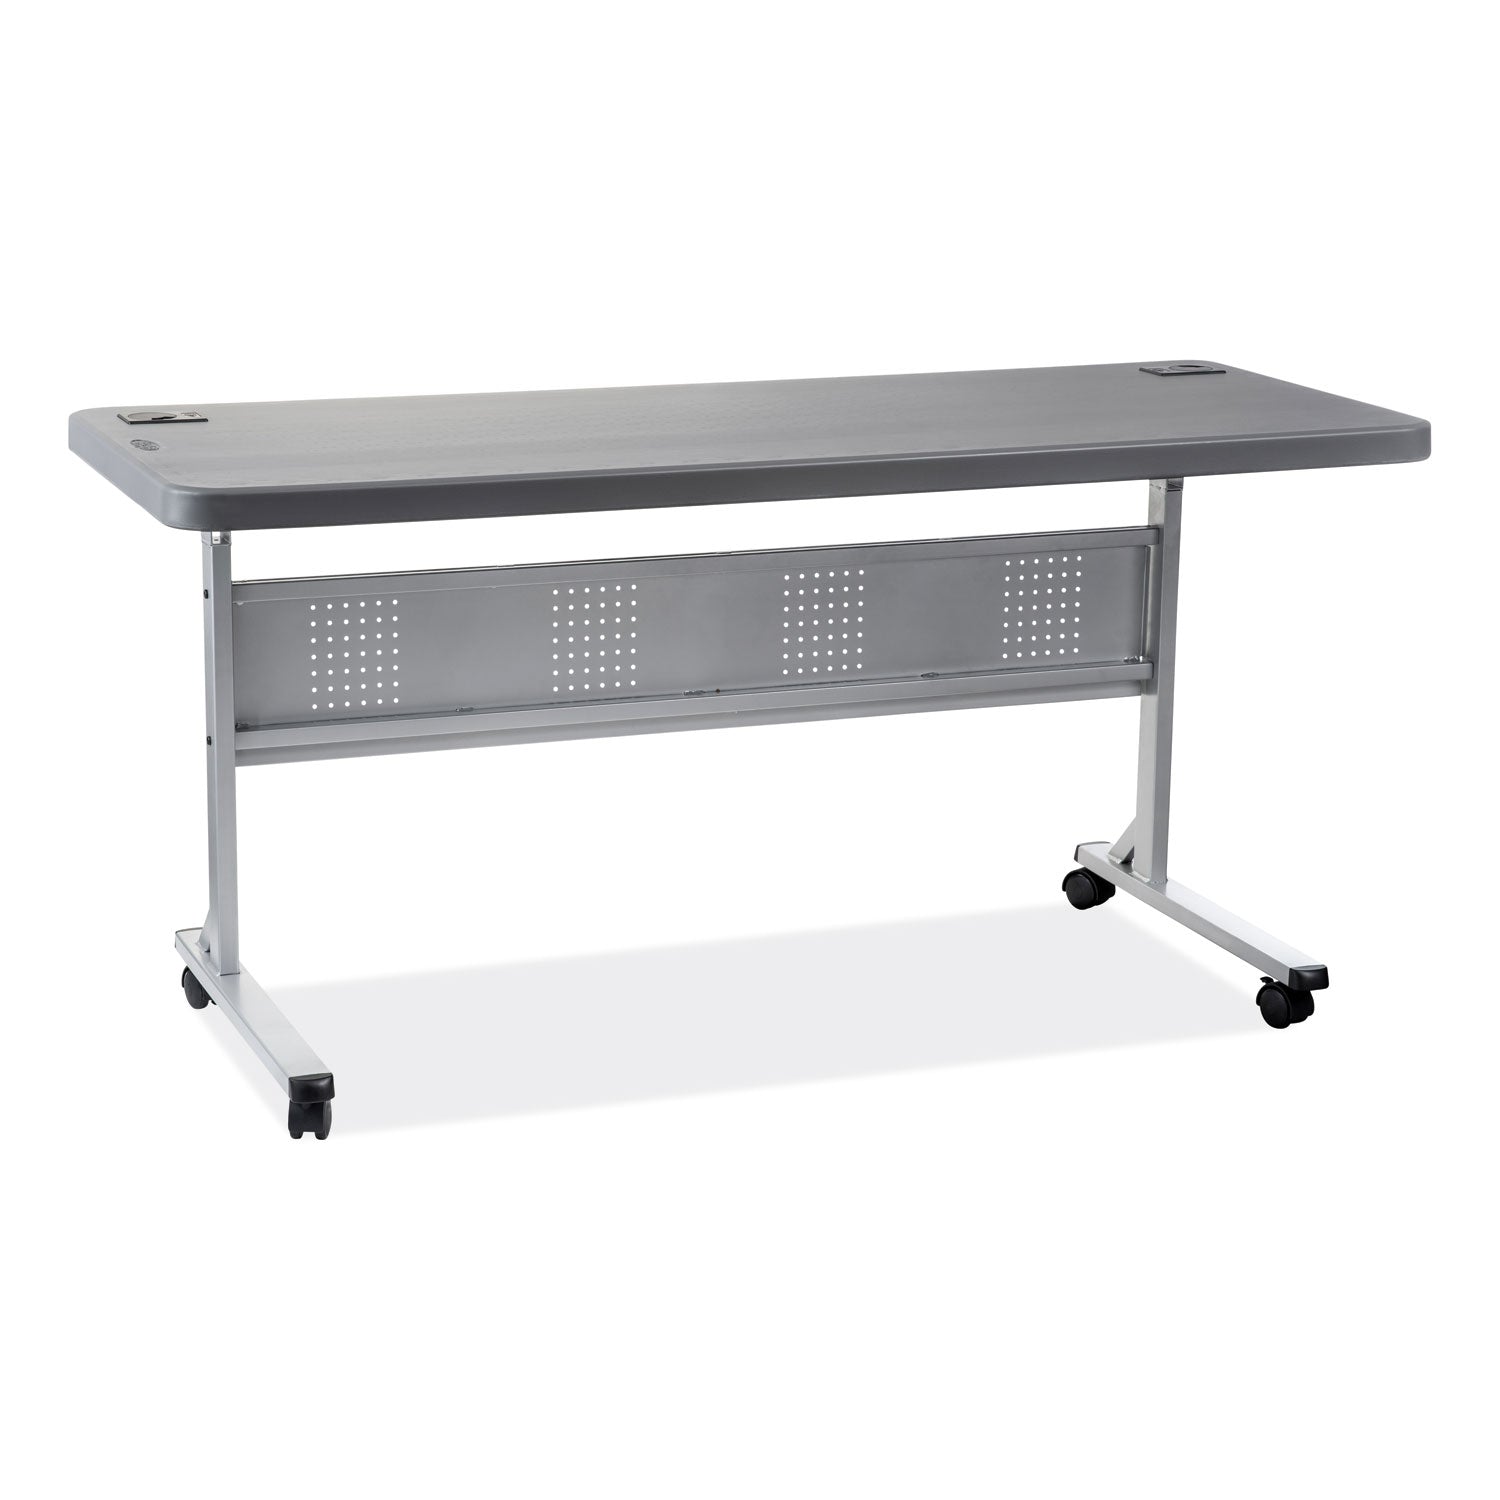 flip-n-store-training-table-rectangular-24-x-60-x-295-charcoal-gray-ships-in-1-3-business-days_npsbpft246020 - 1